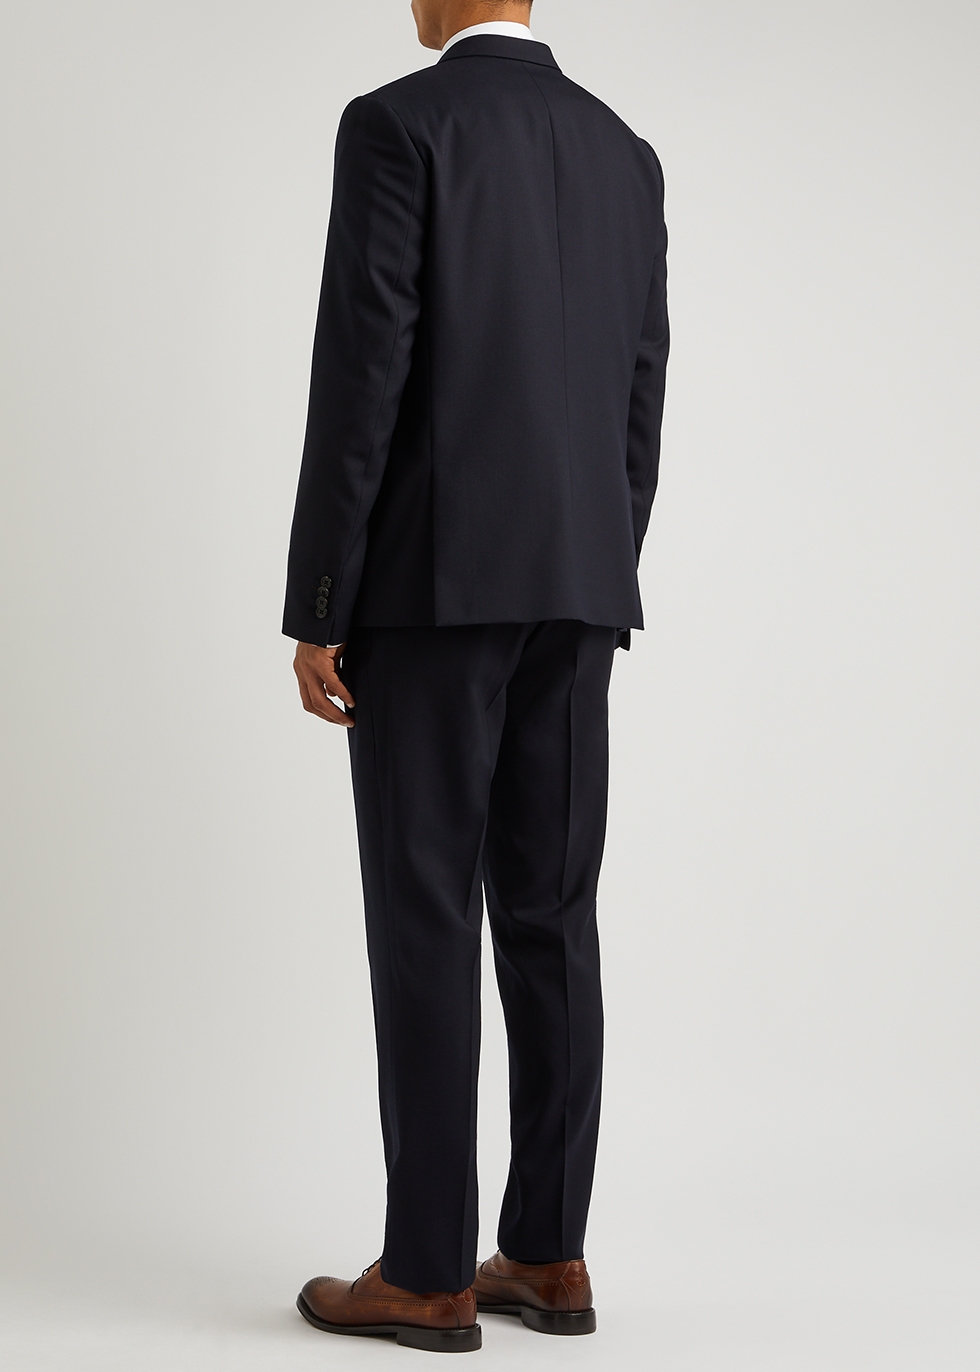 PS by Paul Smith Suit Trousers  ASOS